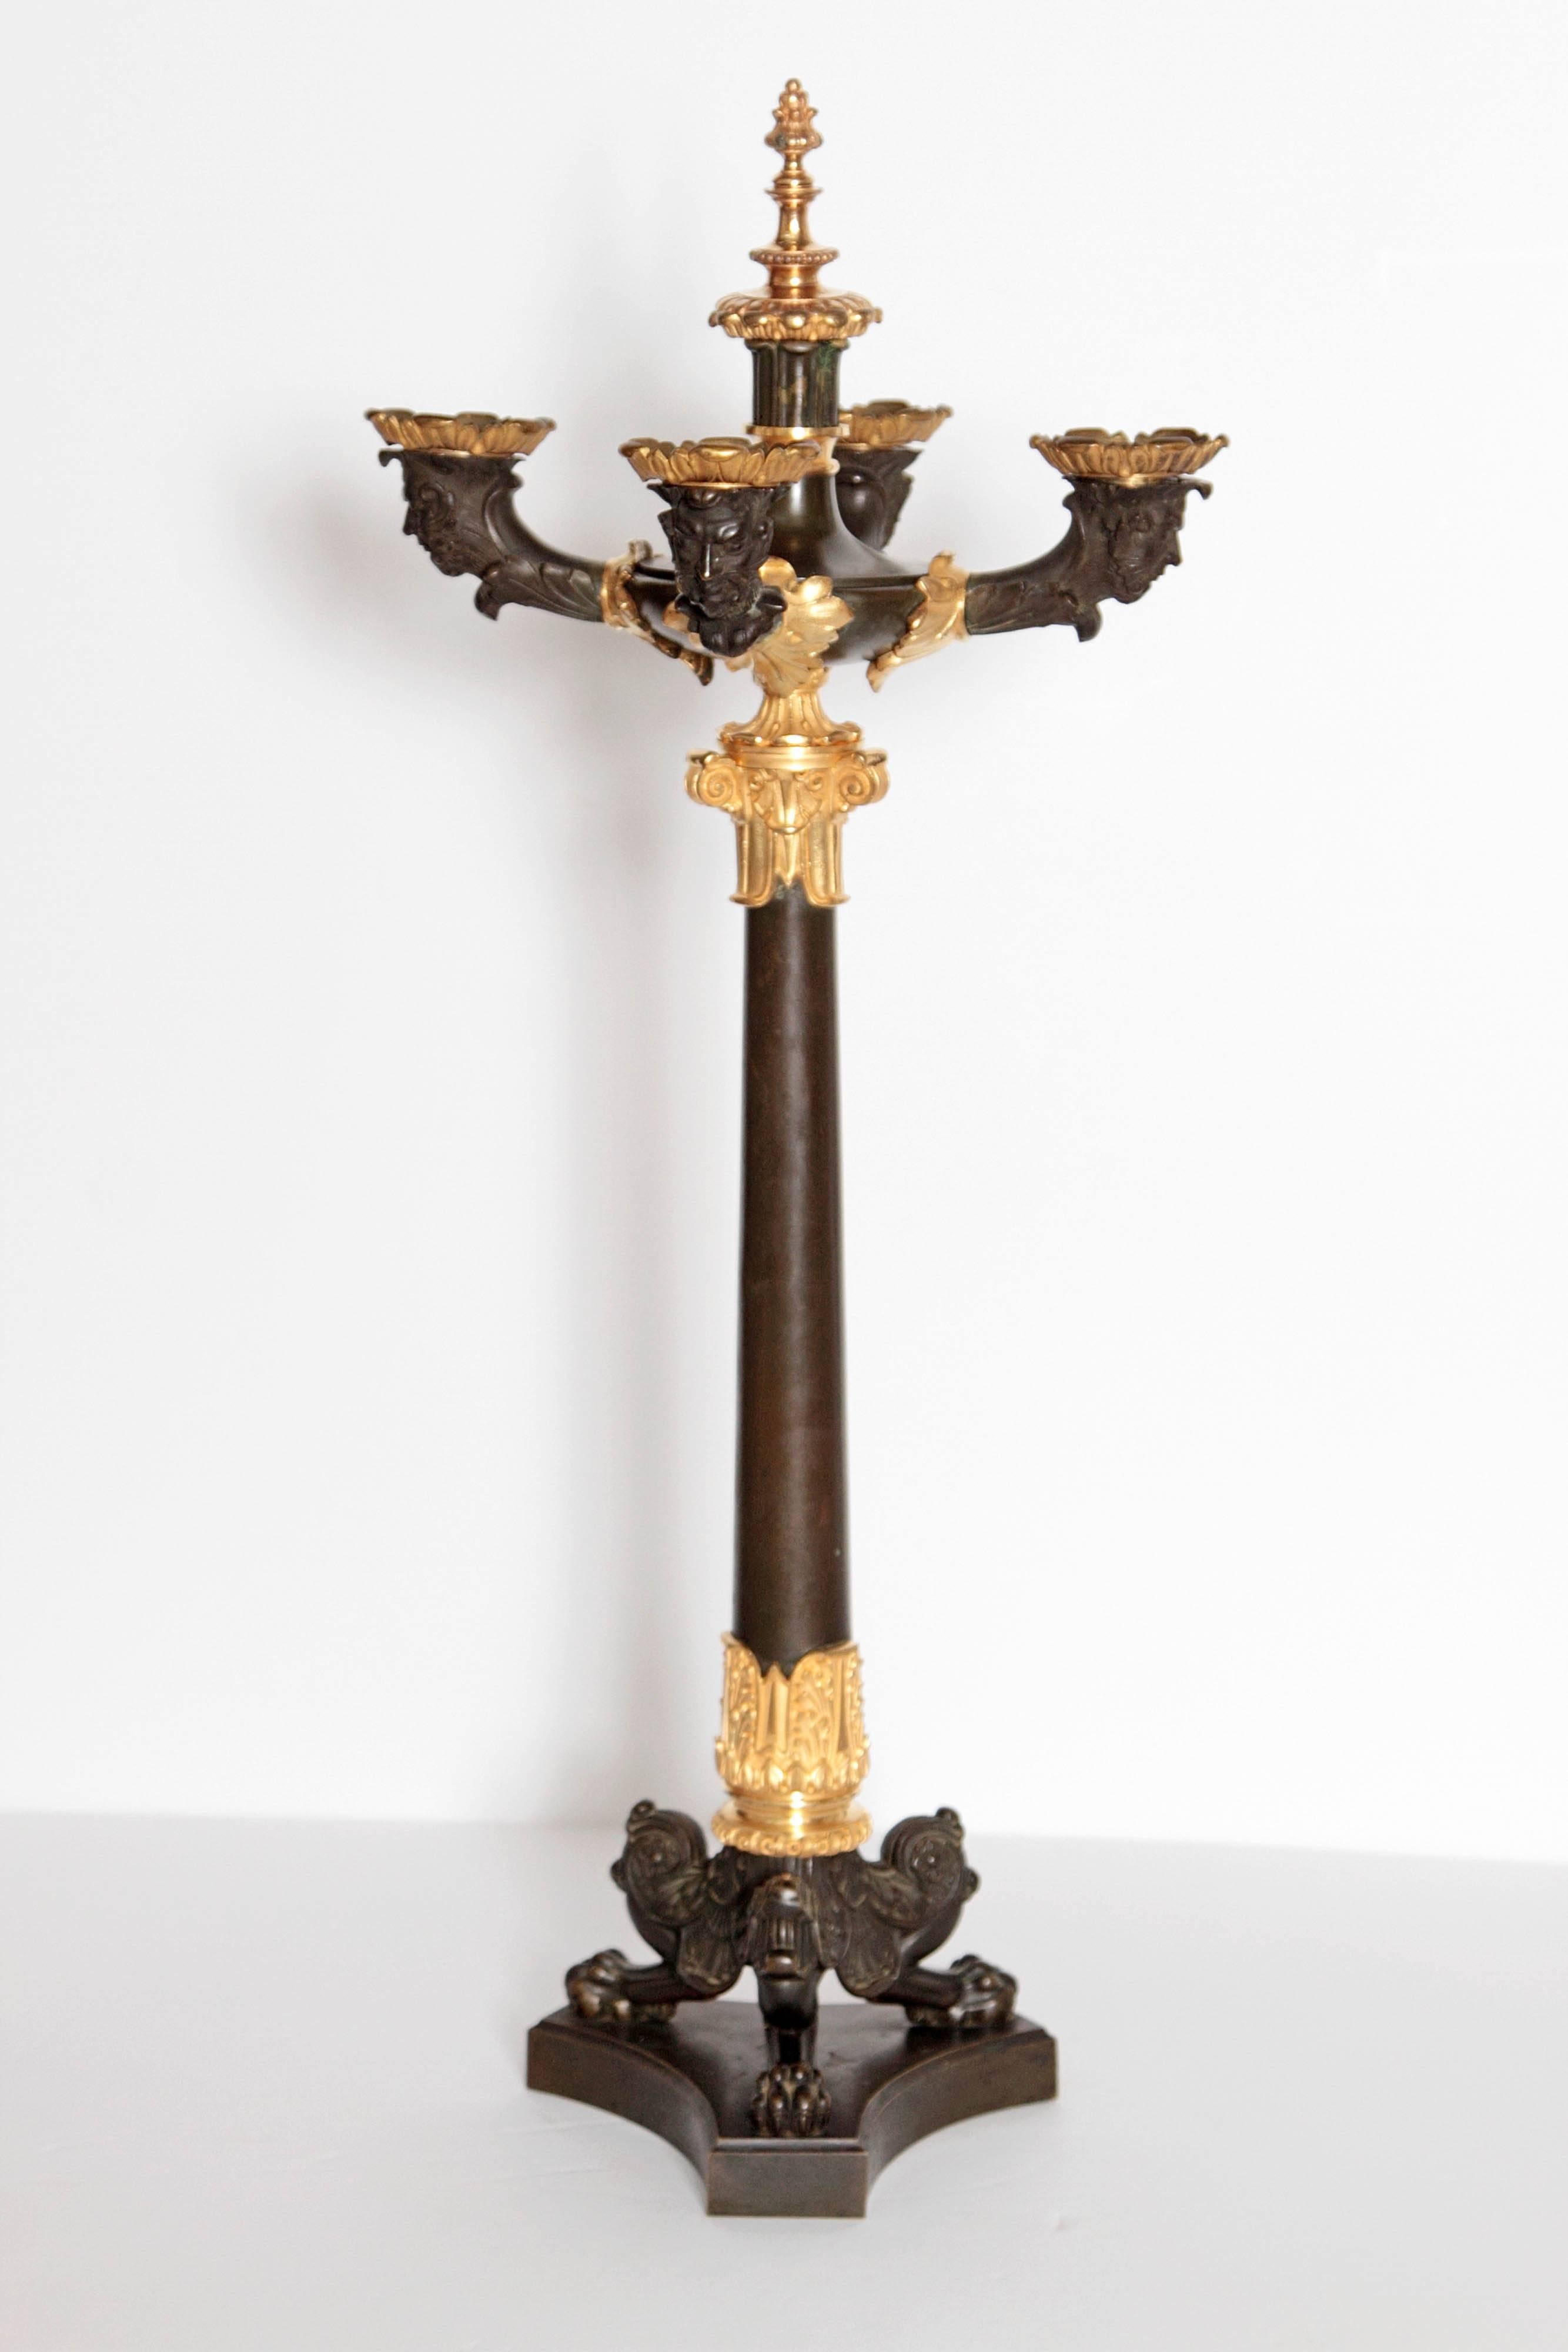 A pair of Charles X patinated and gilt bronze four arm candelabra. Four candle arms have heads below holders. Columns are formed on triangular bases with lion's heads and paw feet, French, 19th century.